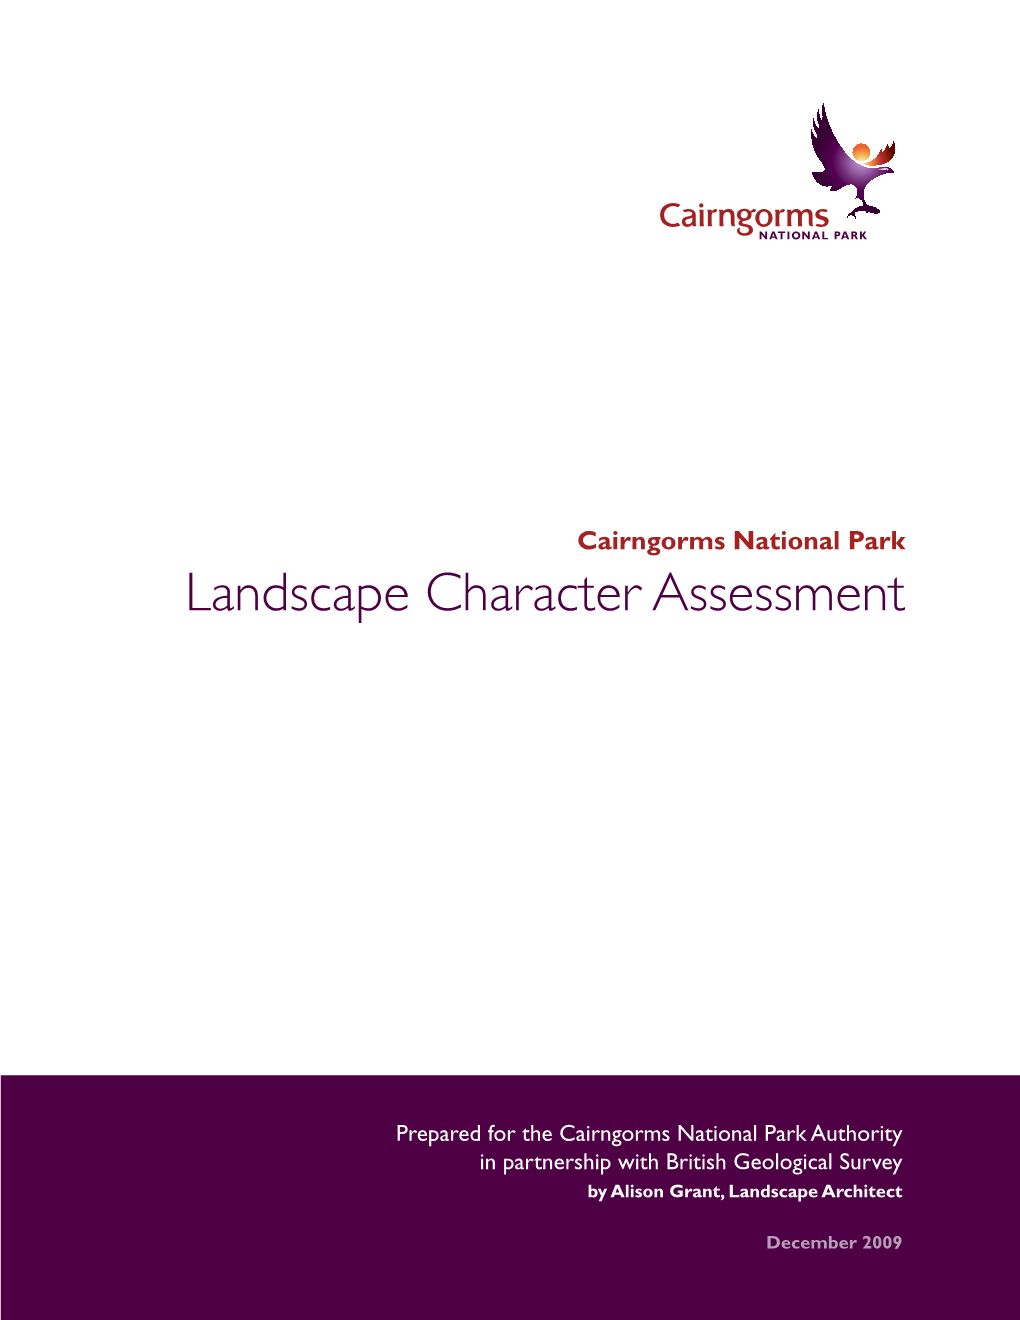 Cairngorms Landscape Character Assessment – Using and Interpreting the Historic Landuse Assessment’ Which Is Also an Output from This Study